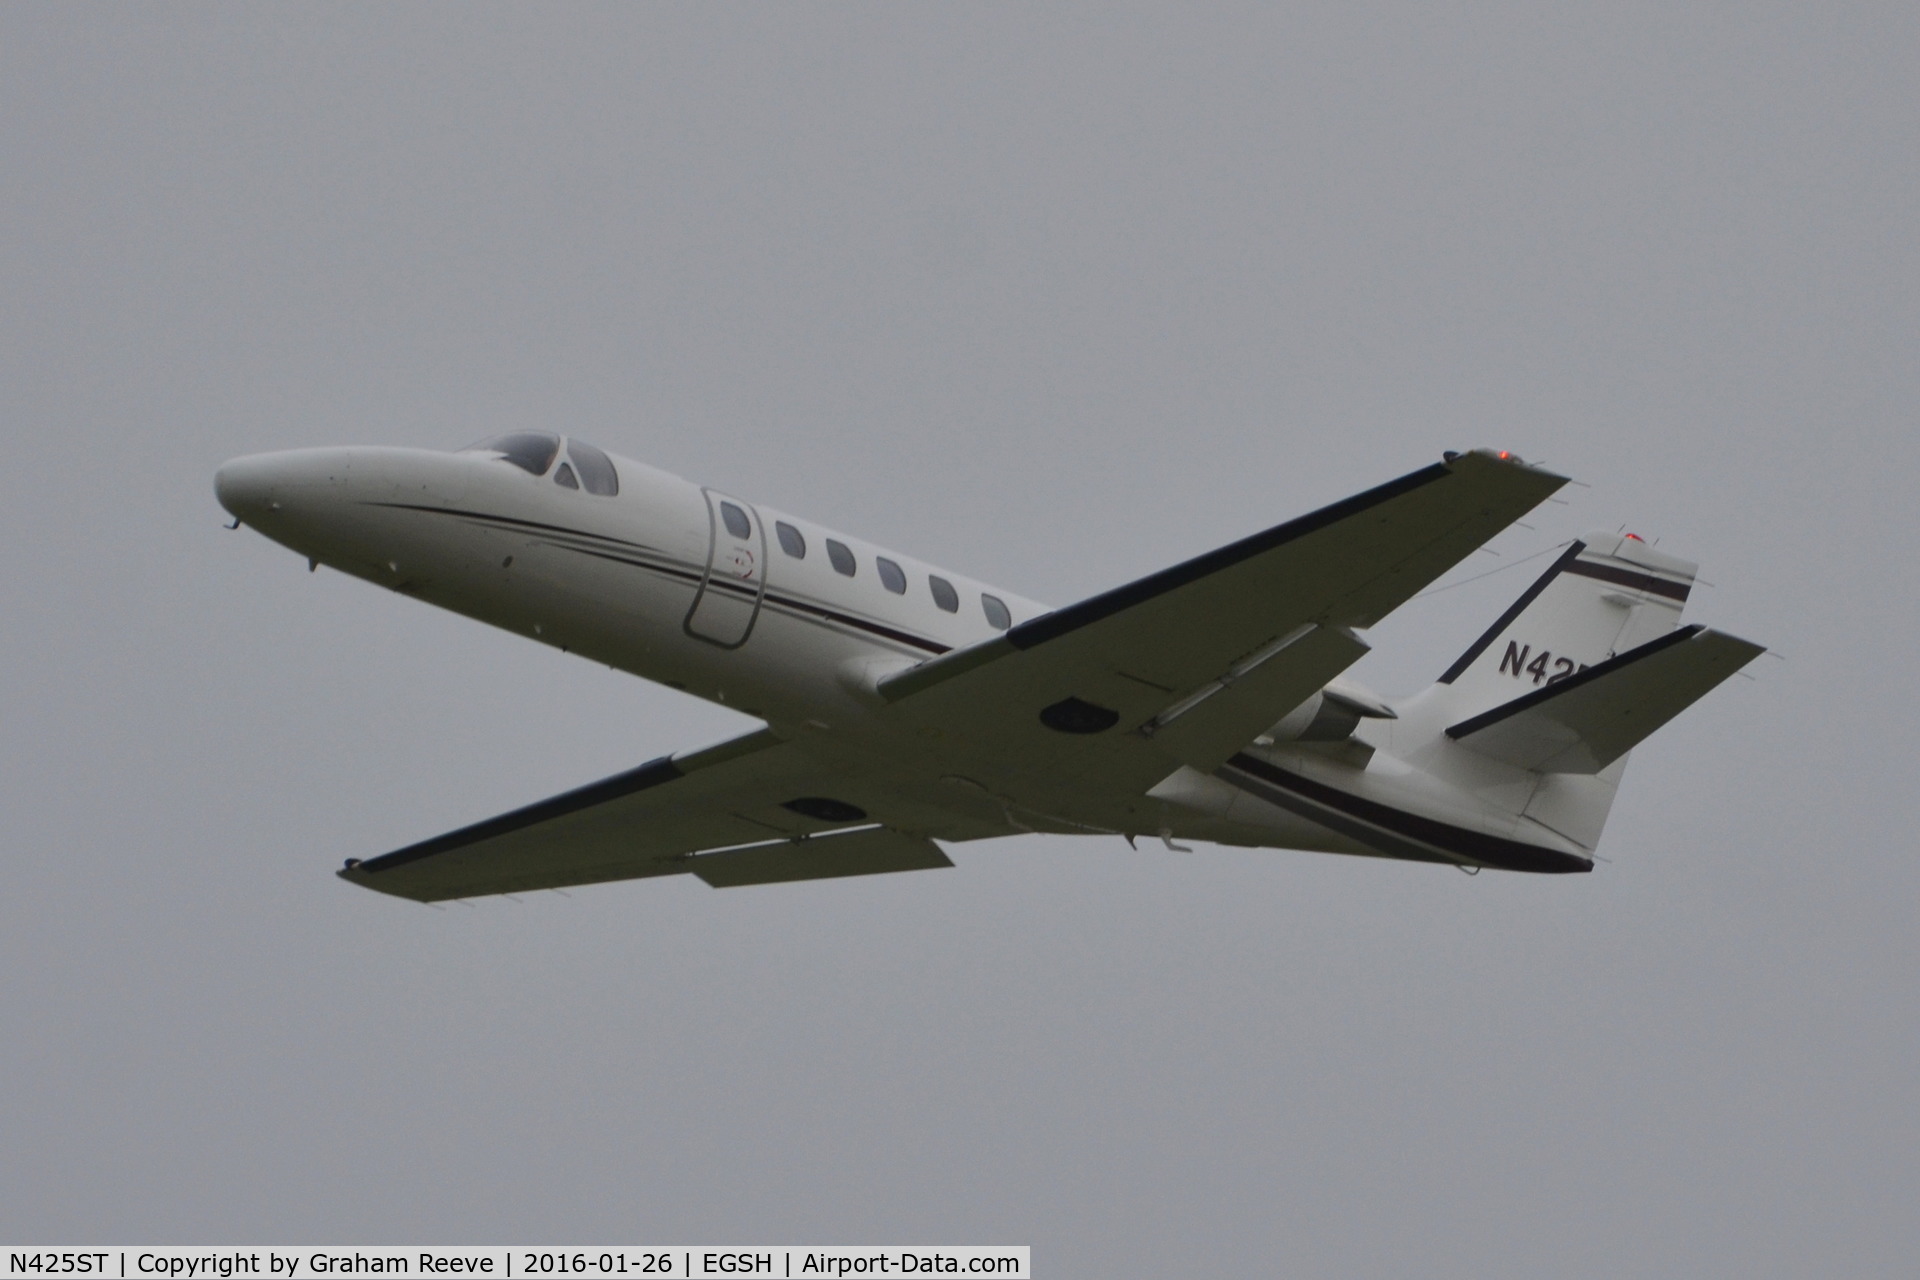 N425ST, 1992 Cessna 550 C/N 550-0709, Departing from Norwich.